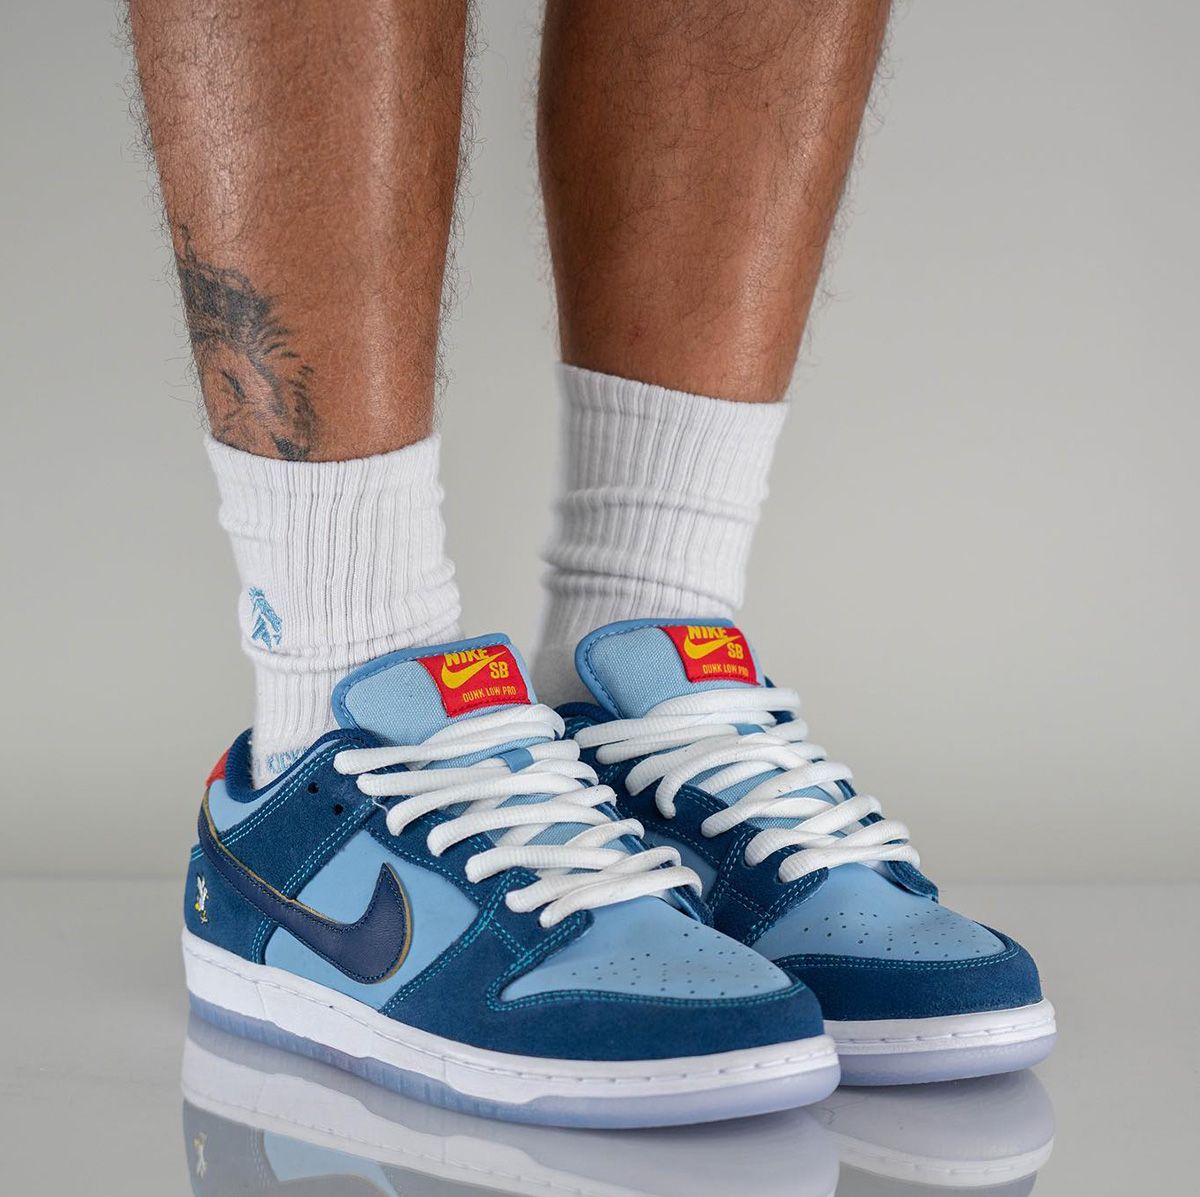 Where to Buy the Why So Sad? x Nike SB Dunk Low | HOUSE OF HEAT